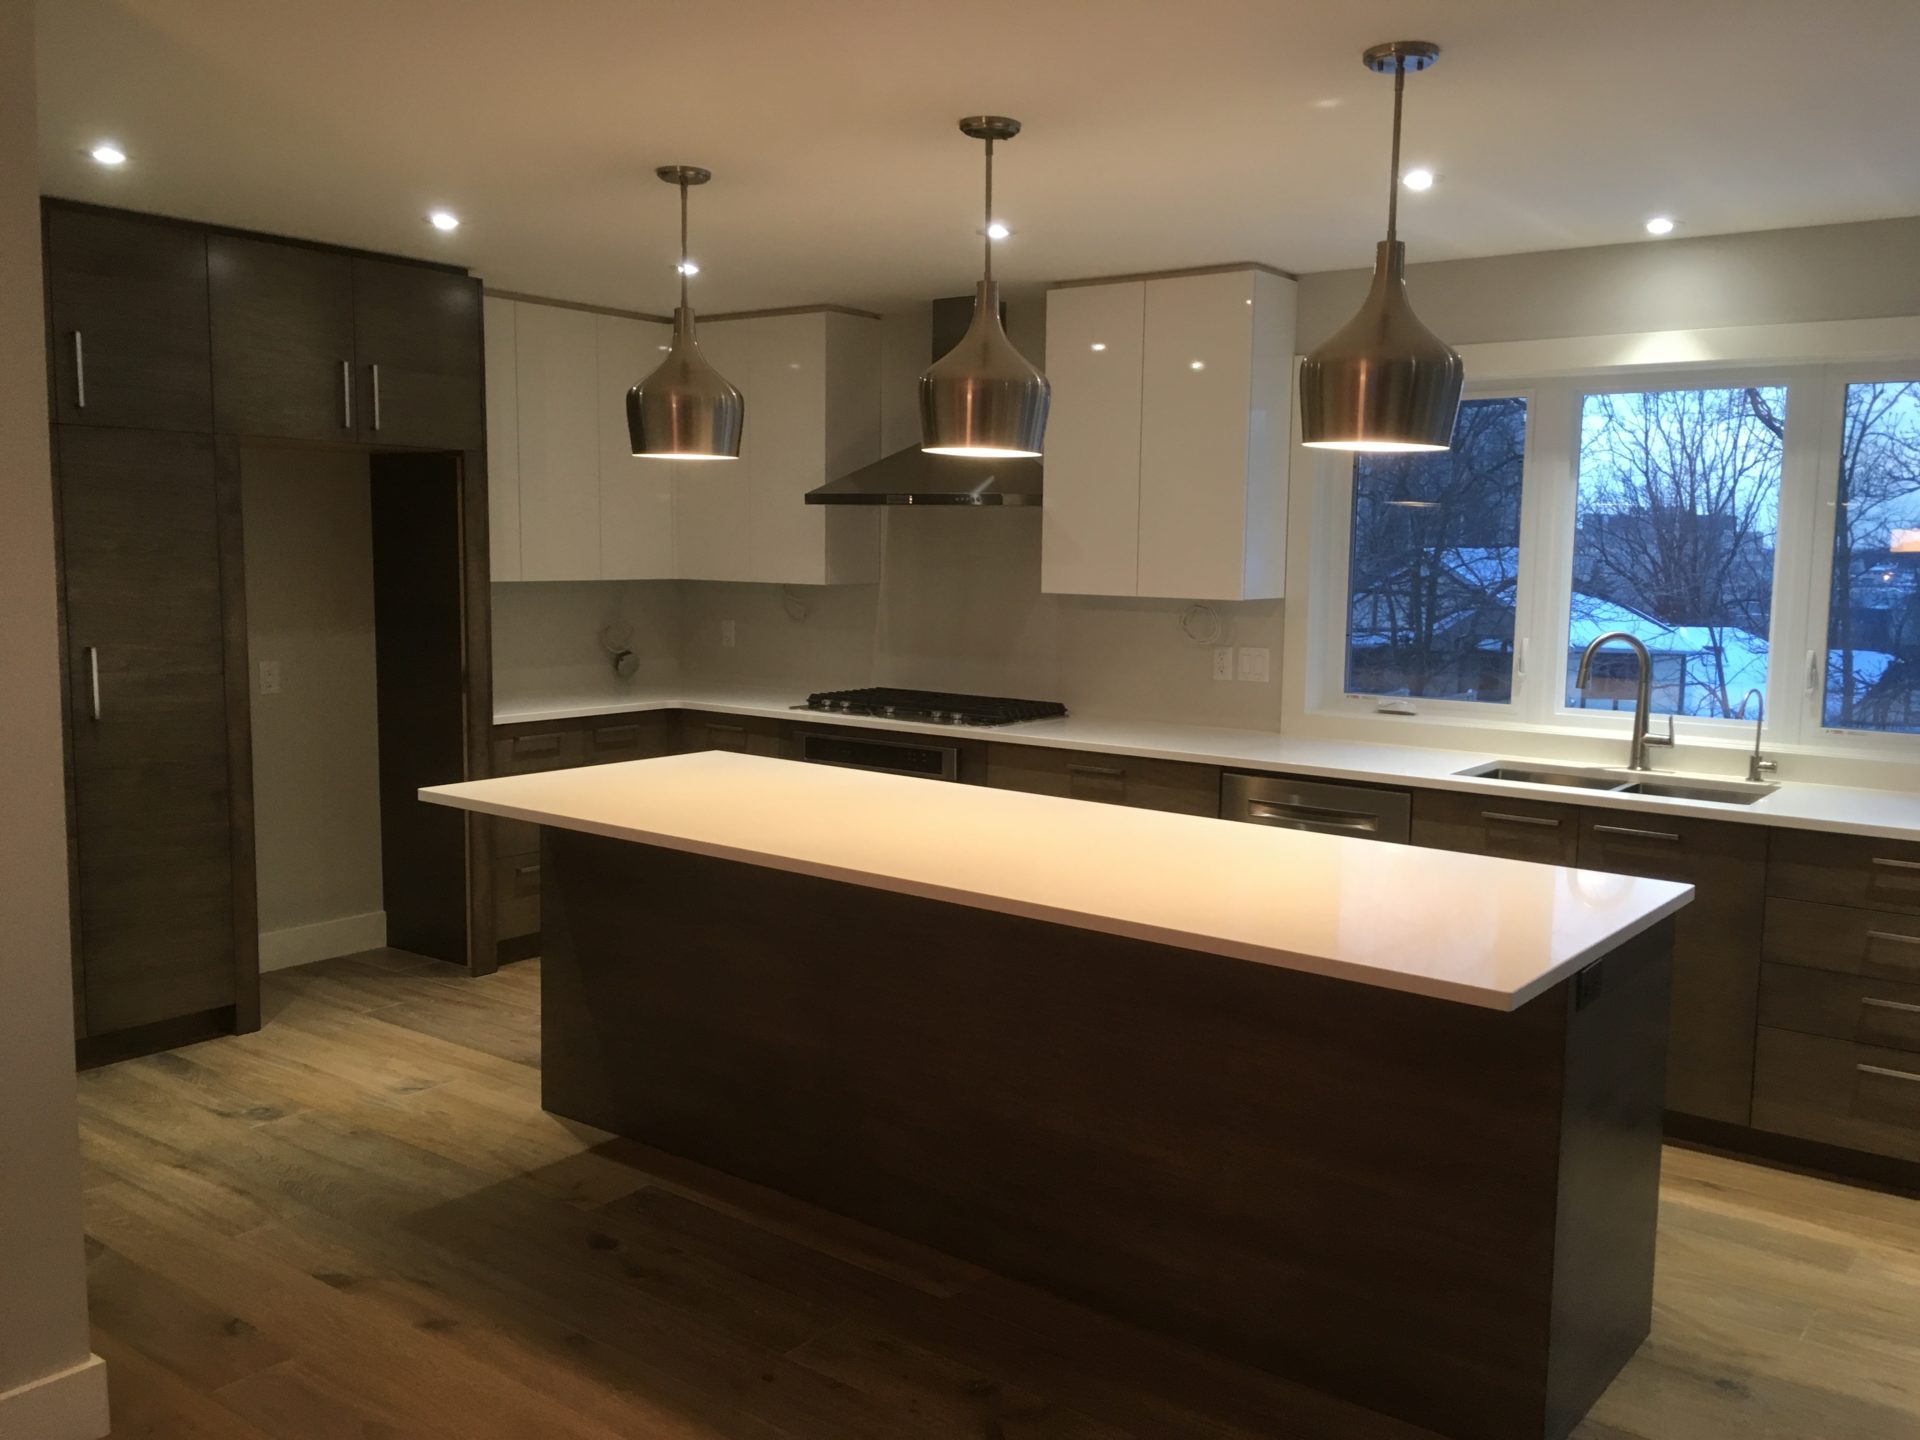 Image of an updated kitchen renovation done by gateway homes